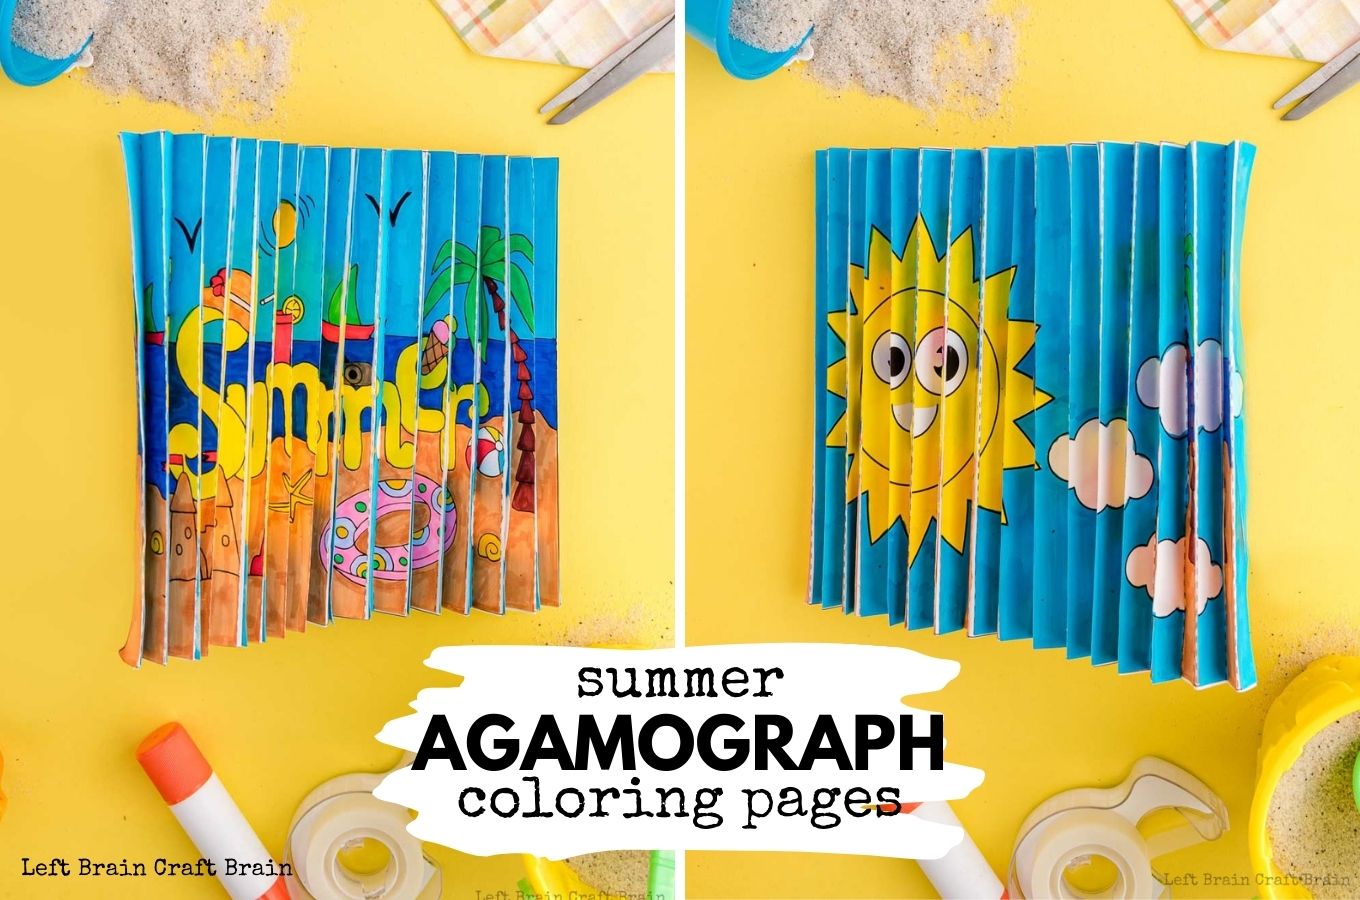 Have some fun coloring this summer with an agamograph, a unique paper craft. It flips the picture when you shift the angle for twice the fun.